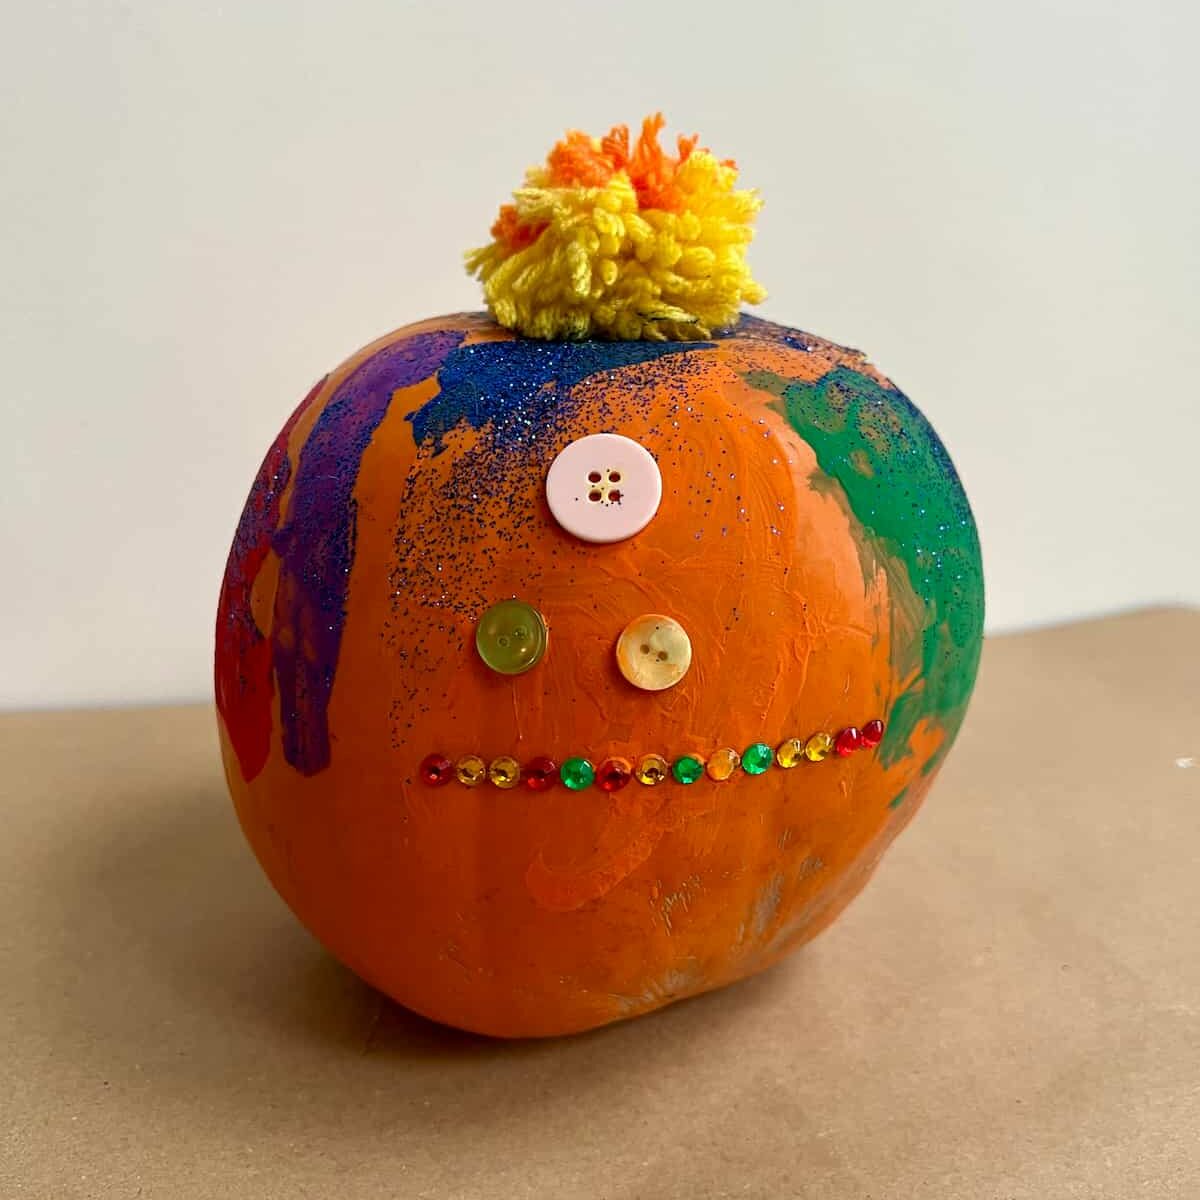 painted pumpkin designs with kids